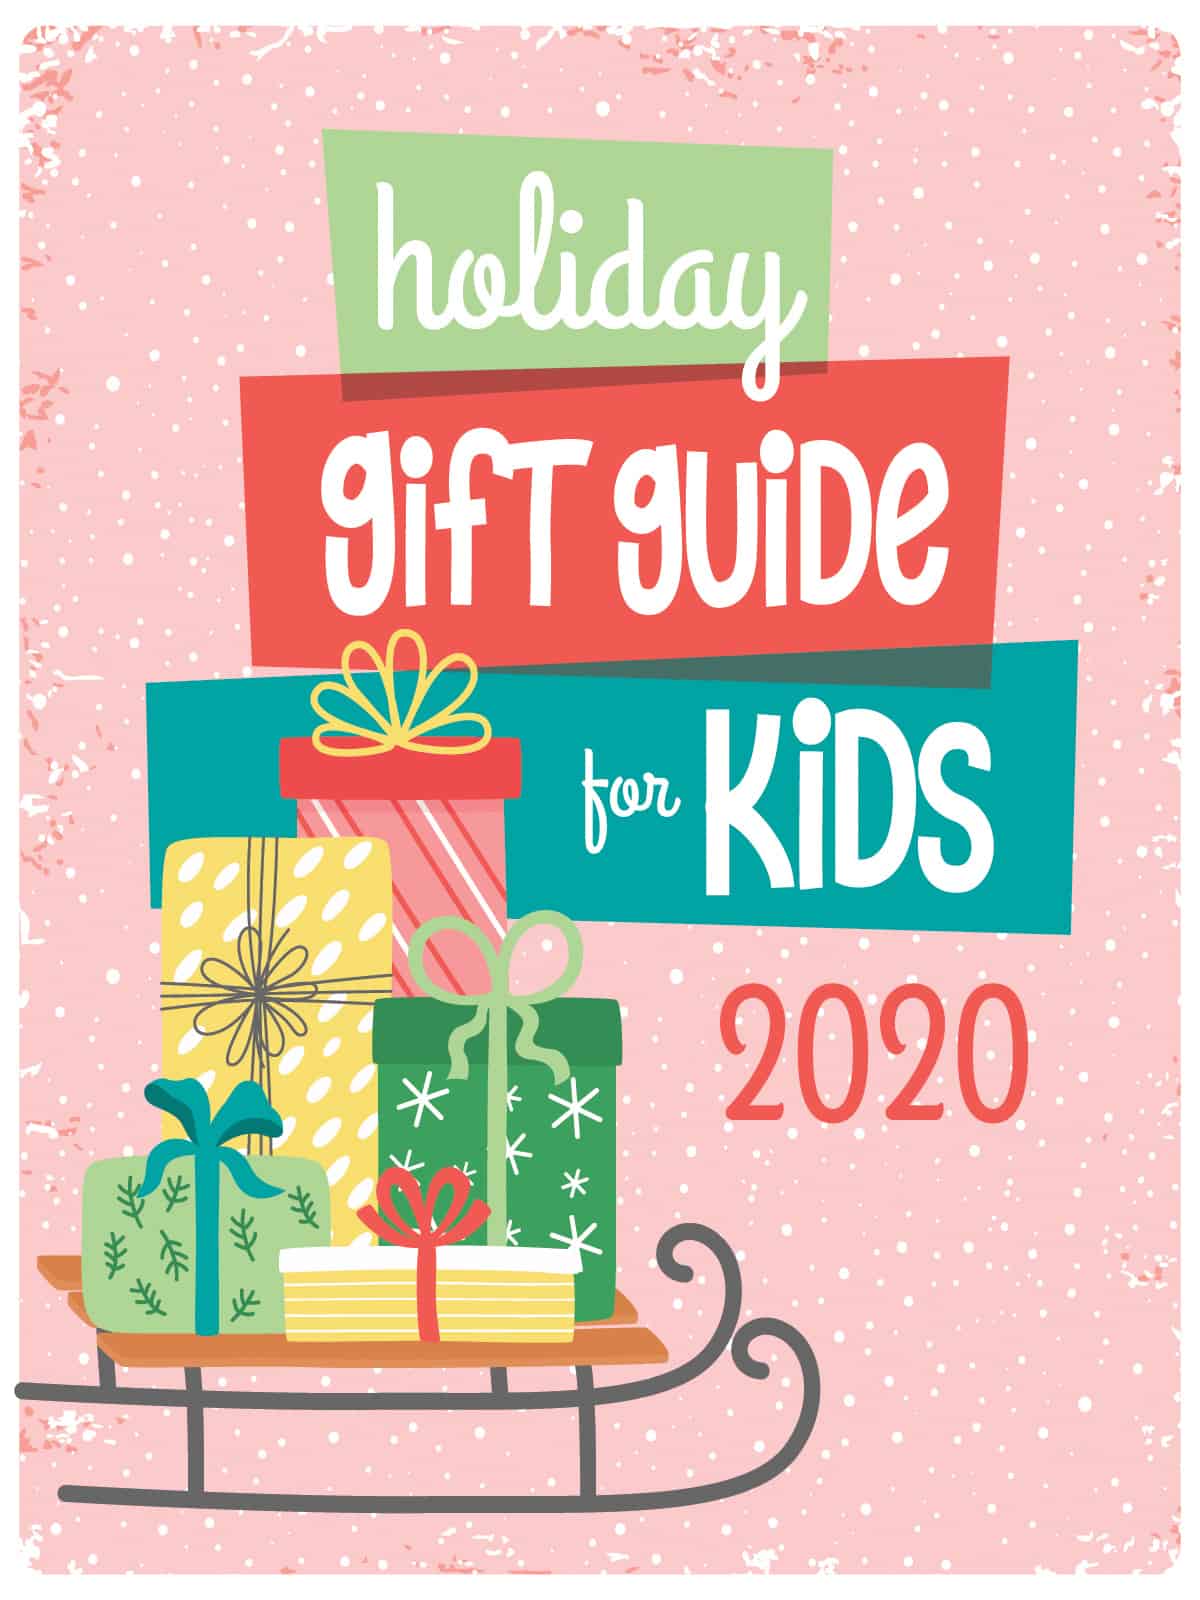 Holiday Gift Guide 2020: Gadget Gifts That Will Wow This Holiday